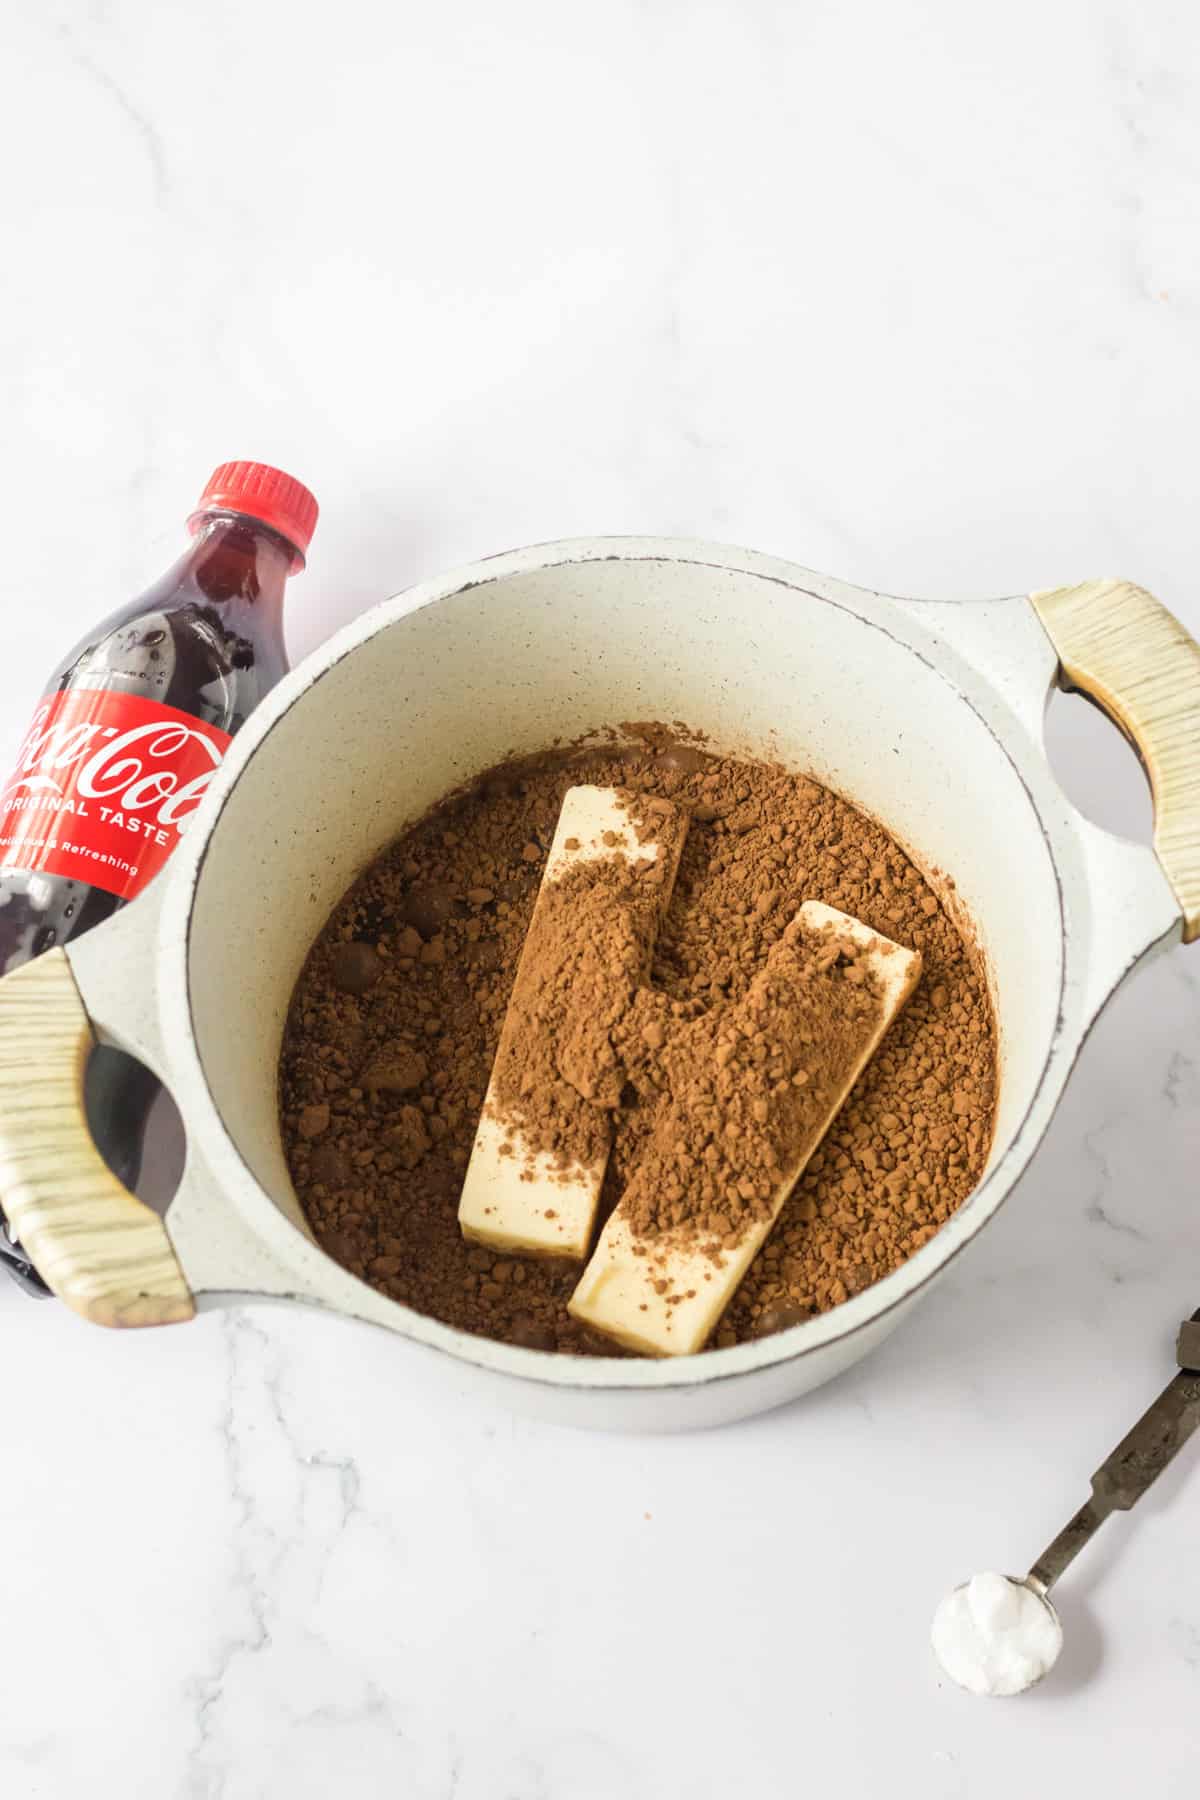 Pot with cocoa powder and two sticks of butter with a bottle of coca cola besides it.